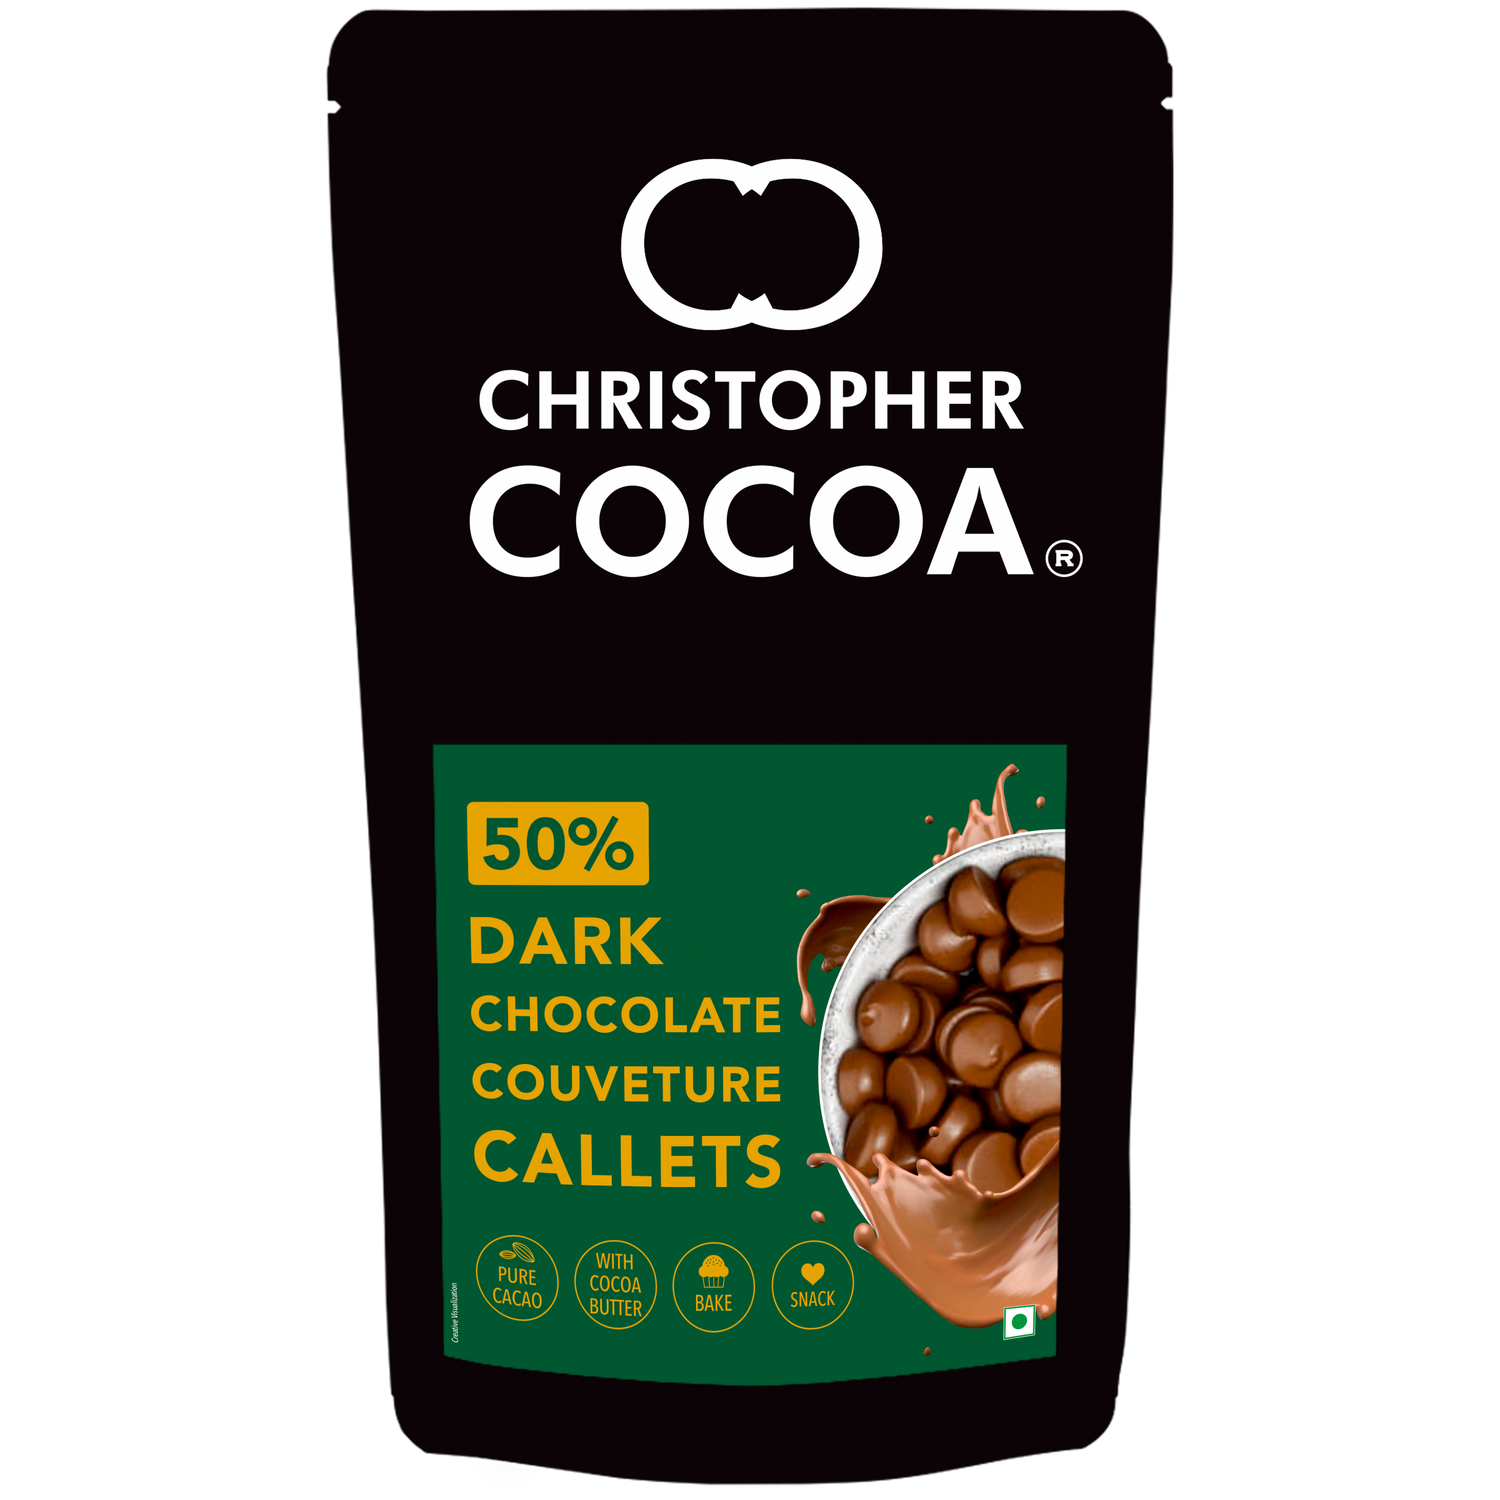 Christopher Cocoa 50% Pure Dark Chocolate Couverture Callets 1Kg (Chocolate Chips, Buttons, Snack, Bake, Cake, Hot Chocolate) 